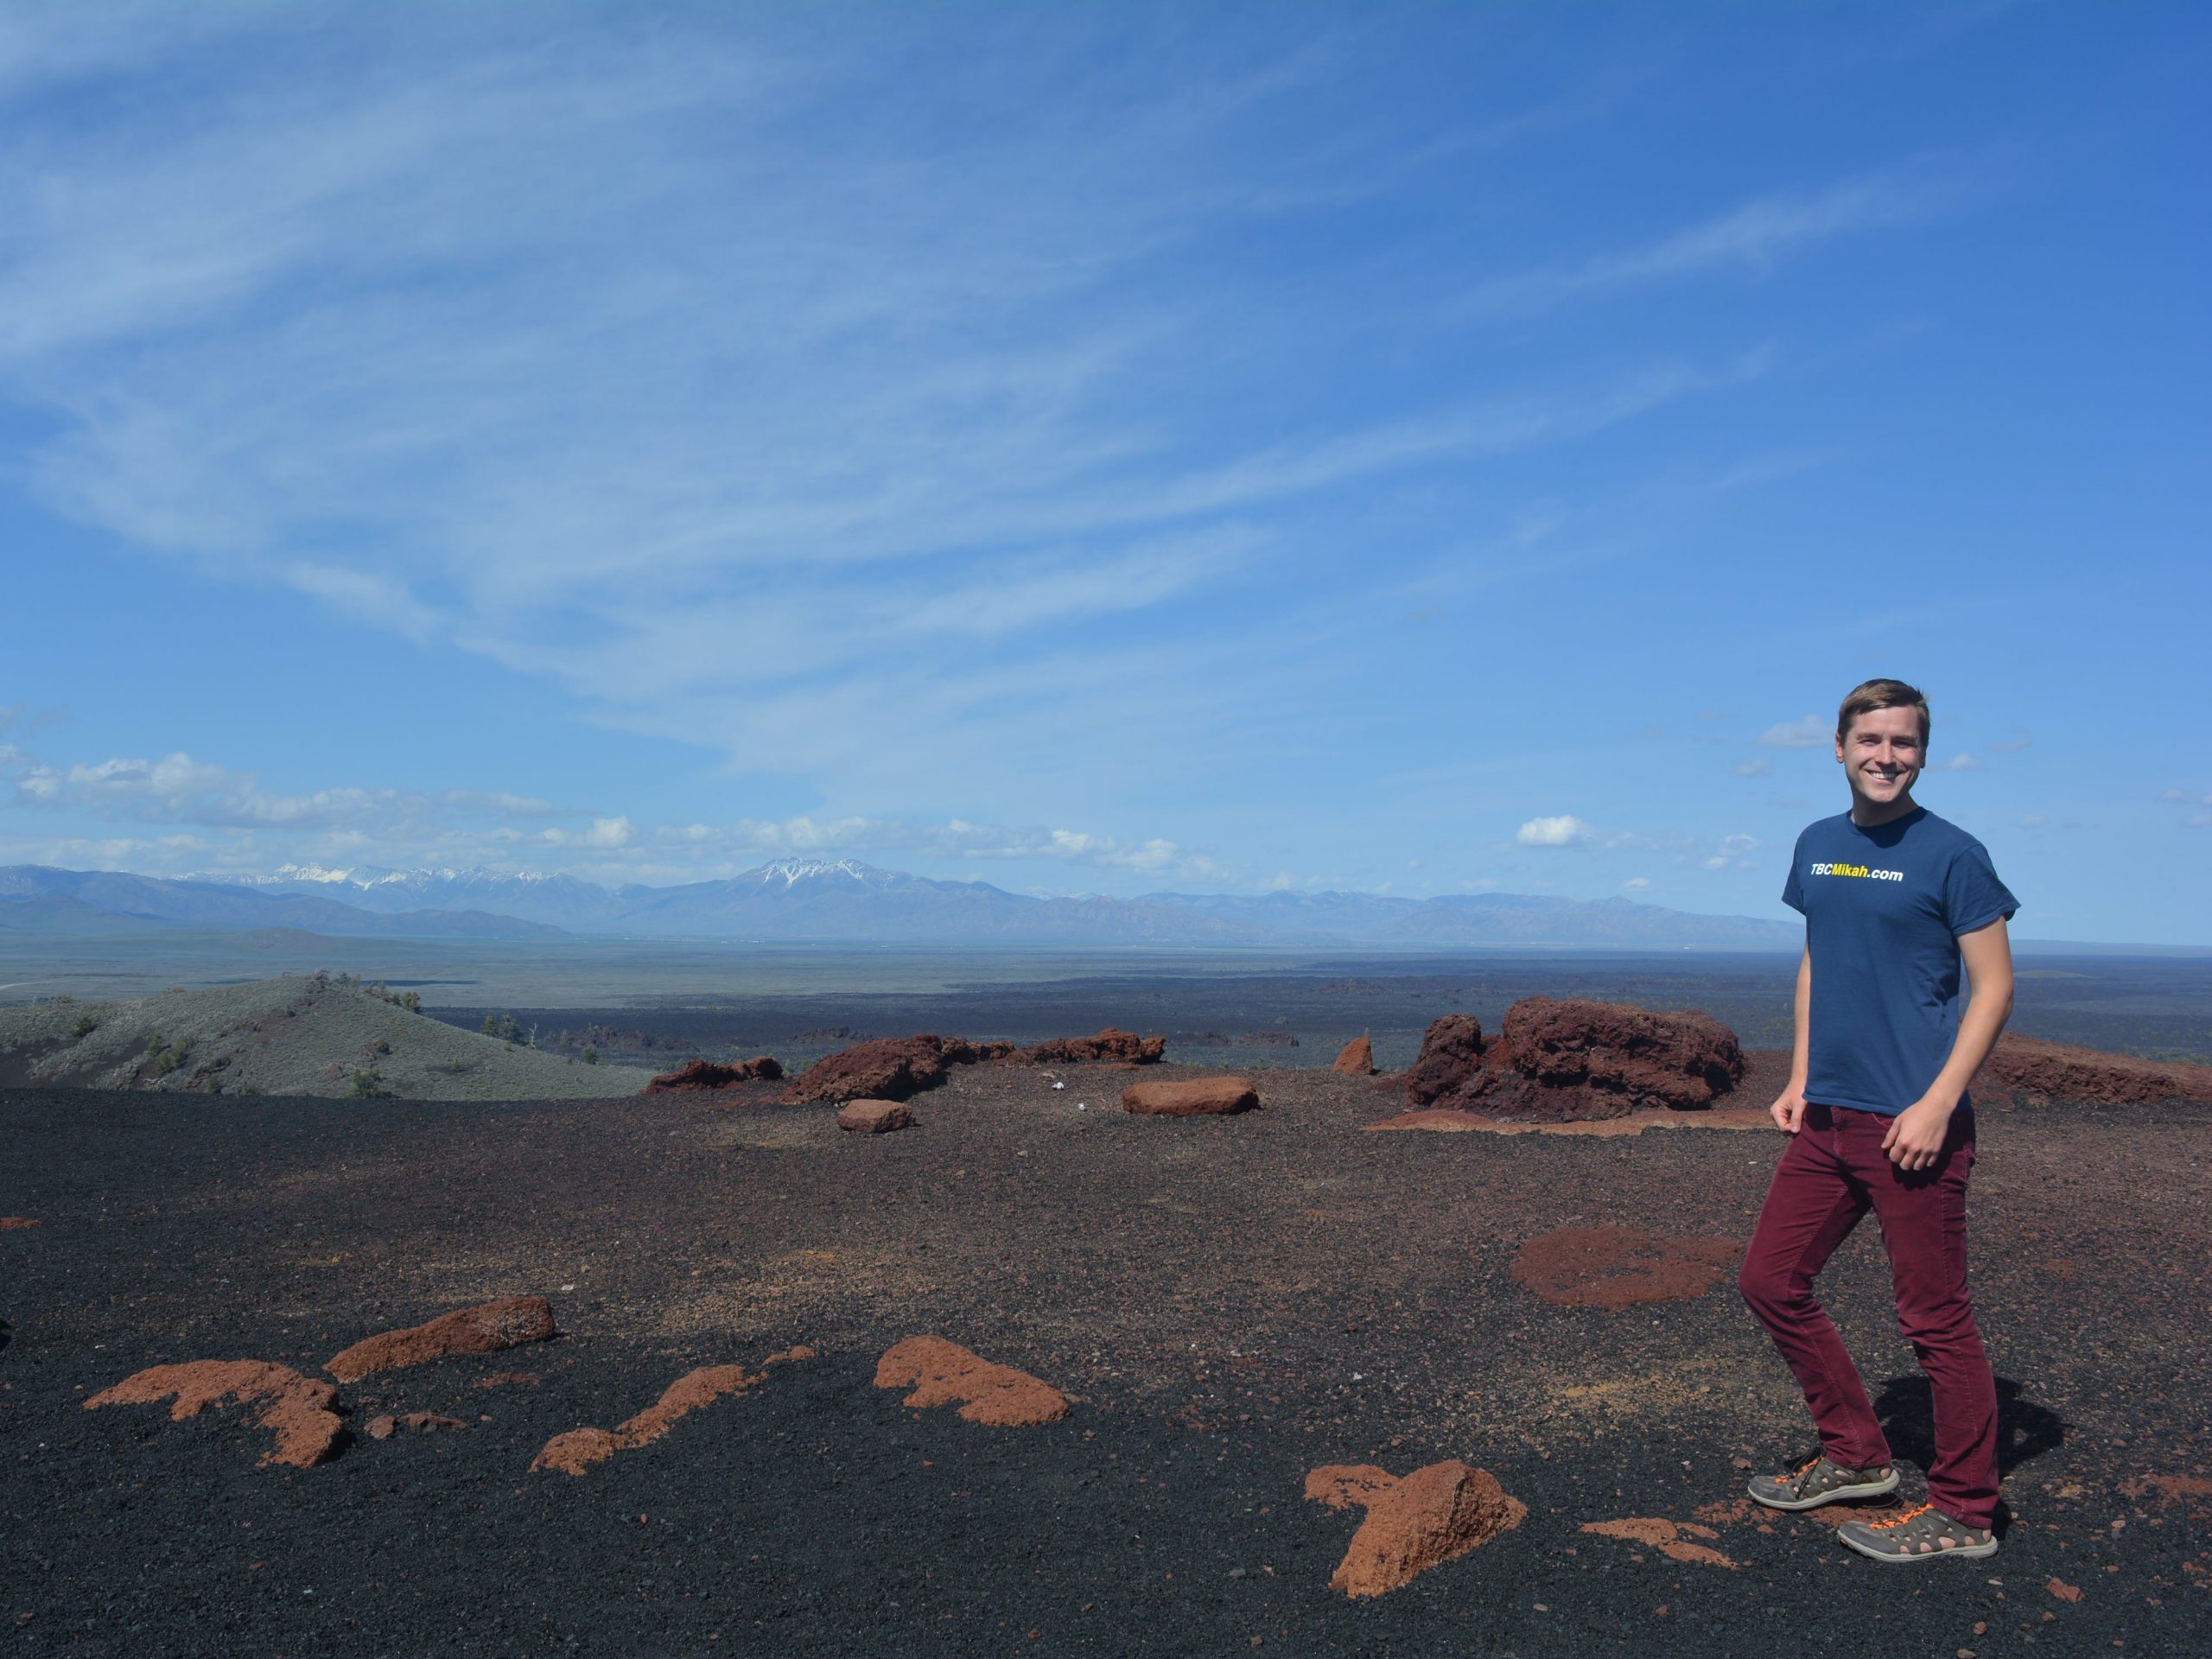 Mikah Meyer stands on the right side of a vast scene with black dirt, red rocks, and mountains in the background. The sky is blue with a few clouds.